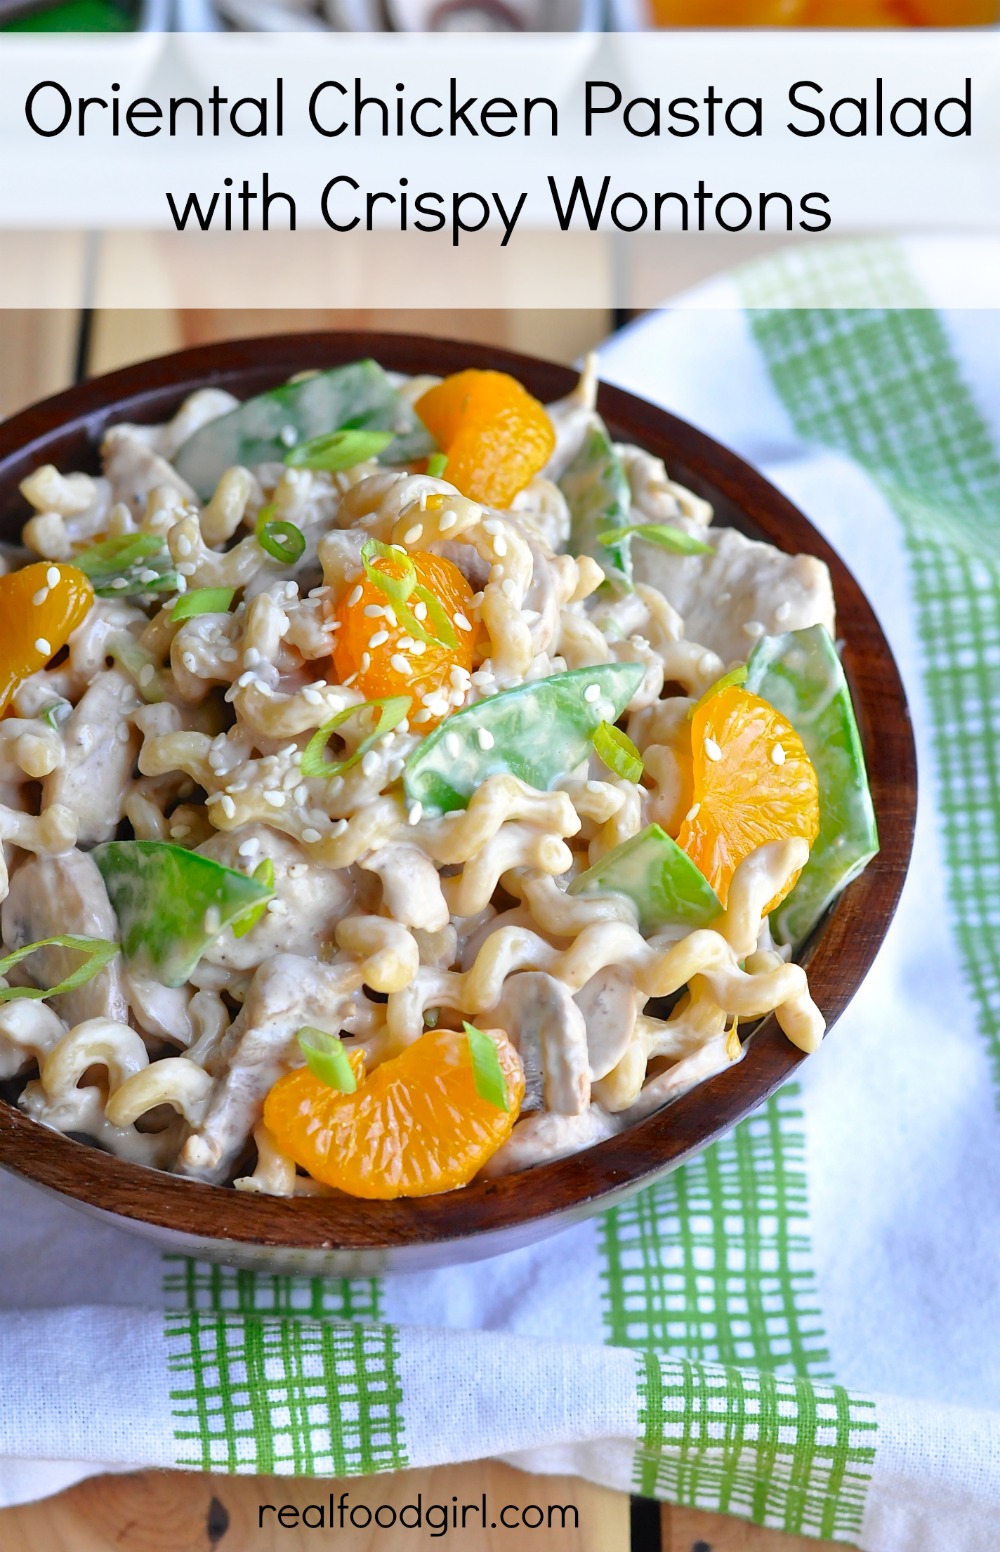 Asian Chicken Pasta Salad with Crispy Wontons by Real Food Girl: Unmodified